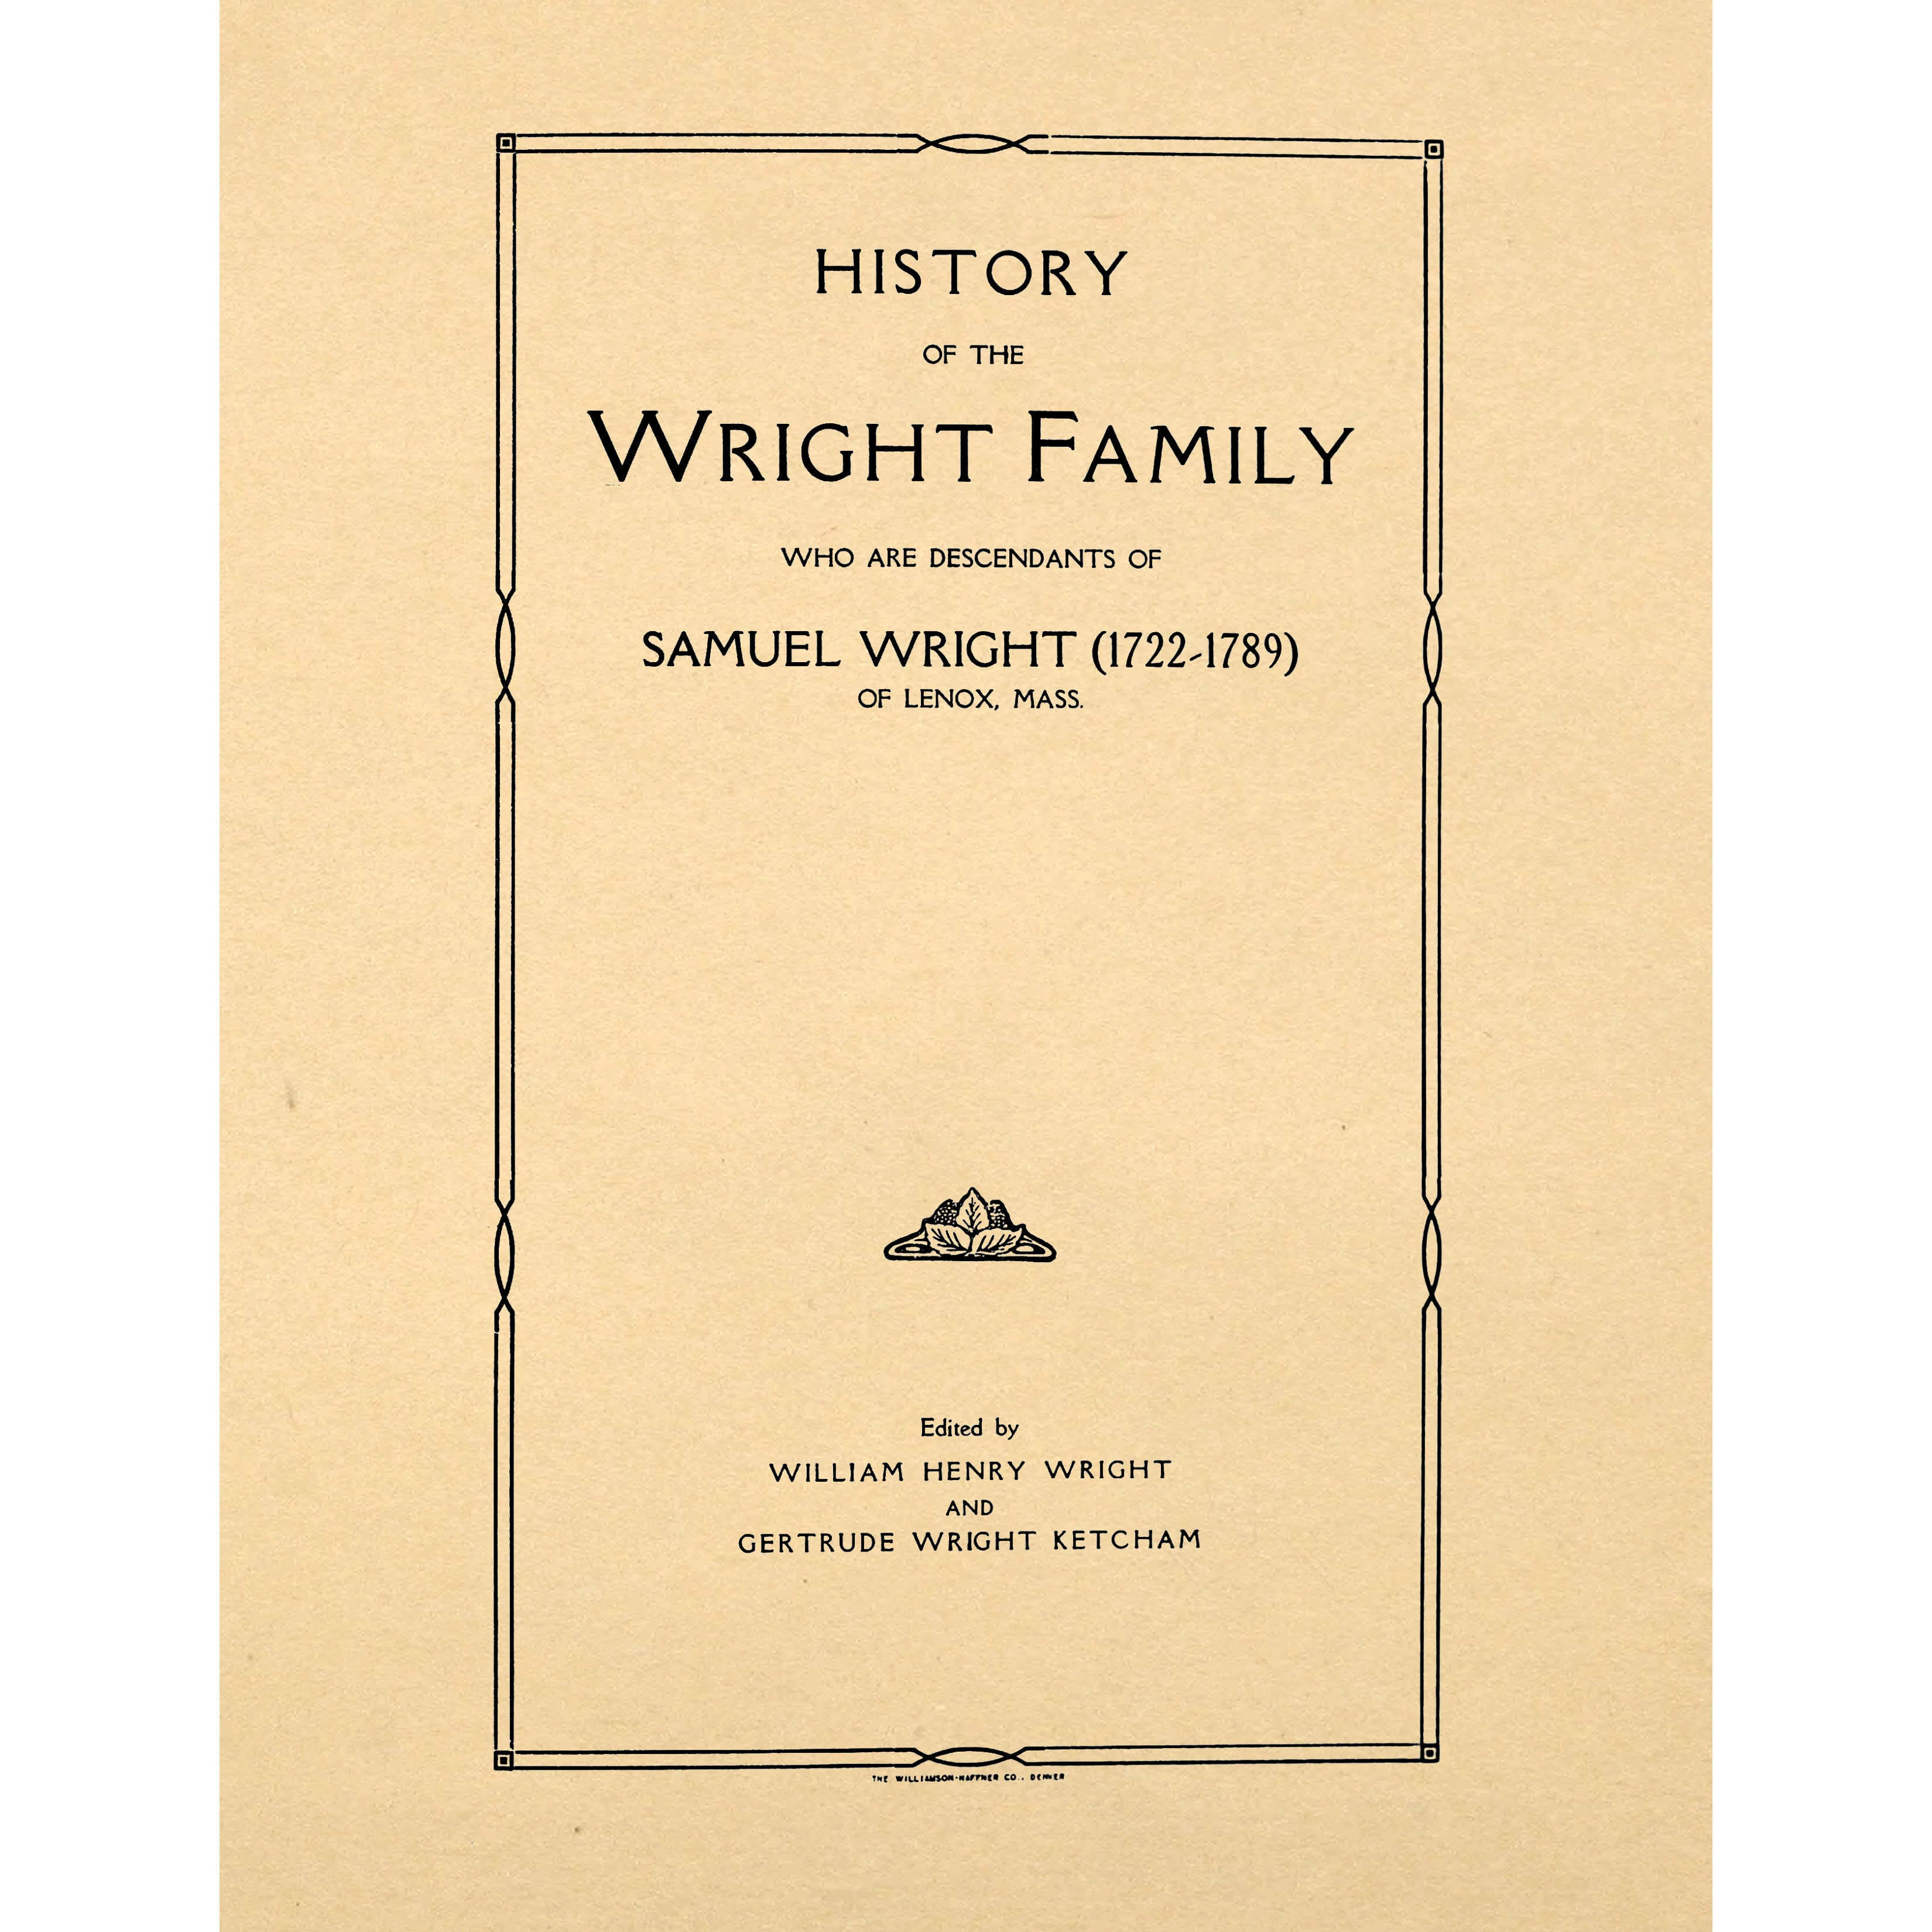 History of the Wright family, who are descendants of Samuel Wright (1722-1789) of Lenox, Mass.,